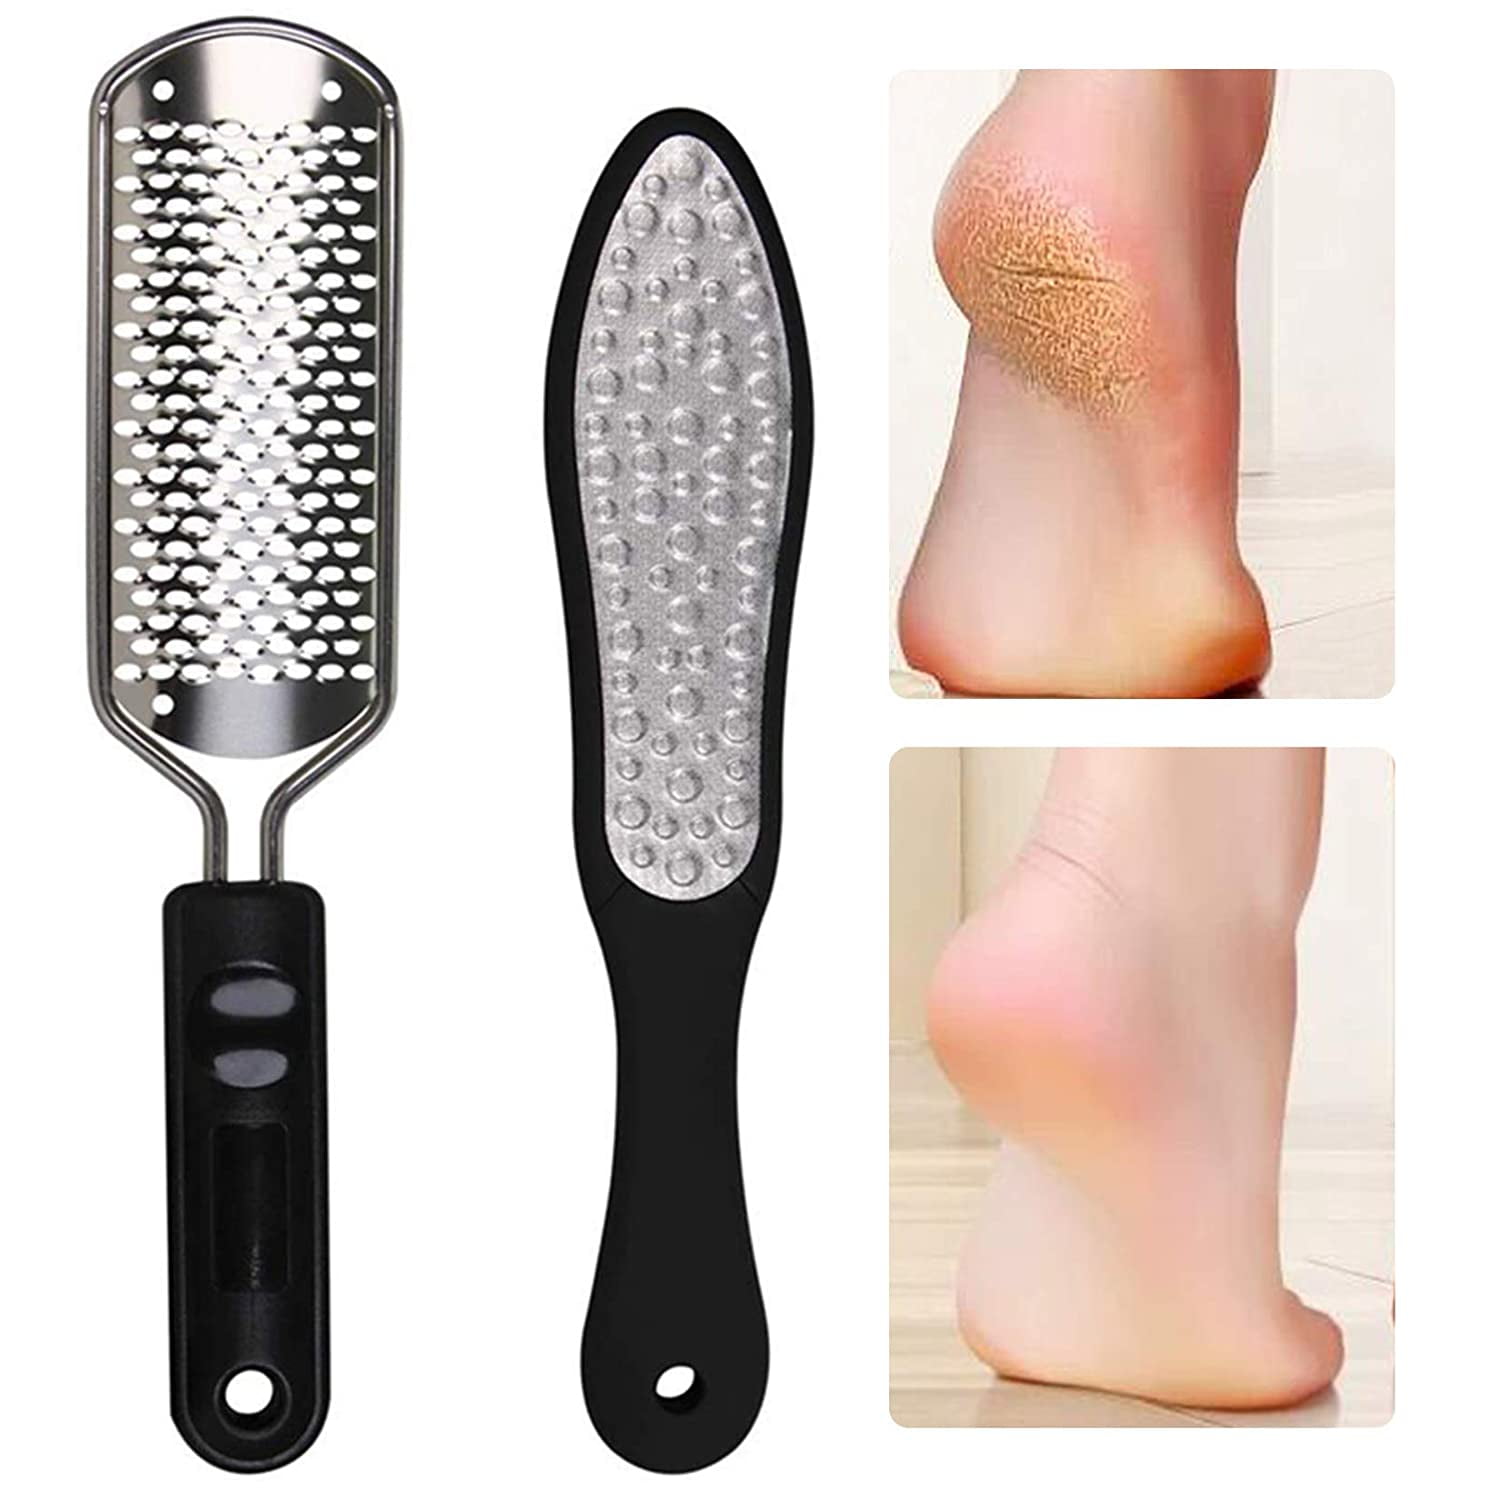 Foot Rasp,3PCS Feet Scrubber Dead Skin,Callus Remover for Feet,Pedicure Tools & Foot Scrubber Can Be used on Both Wet and Dry Feet, Surgical Grade